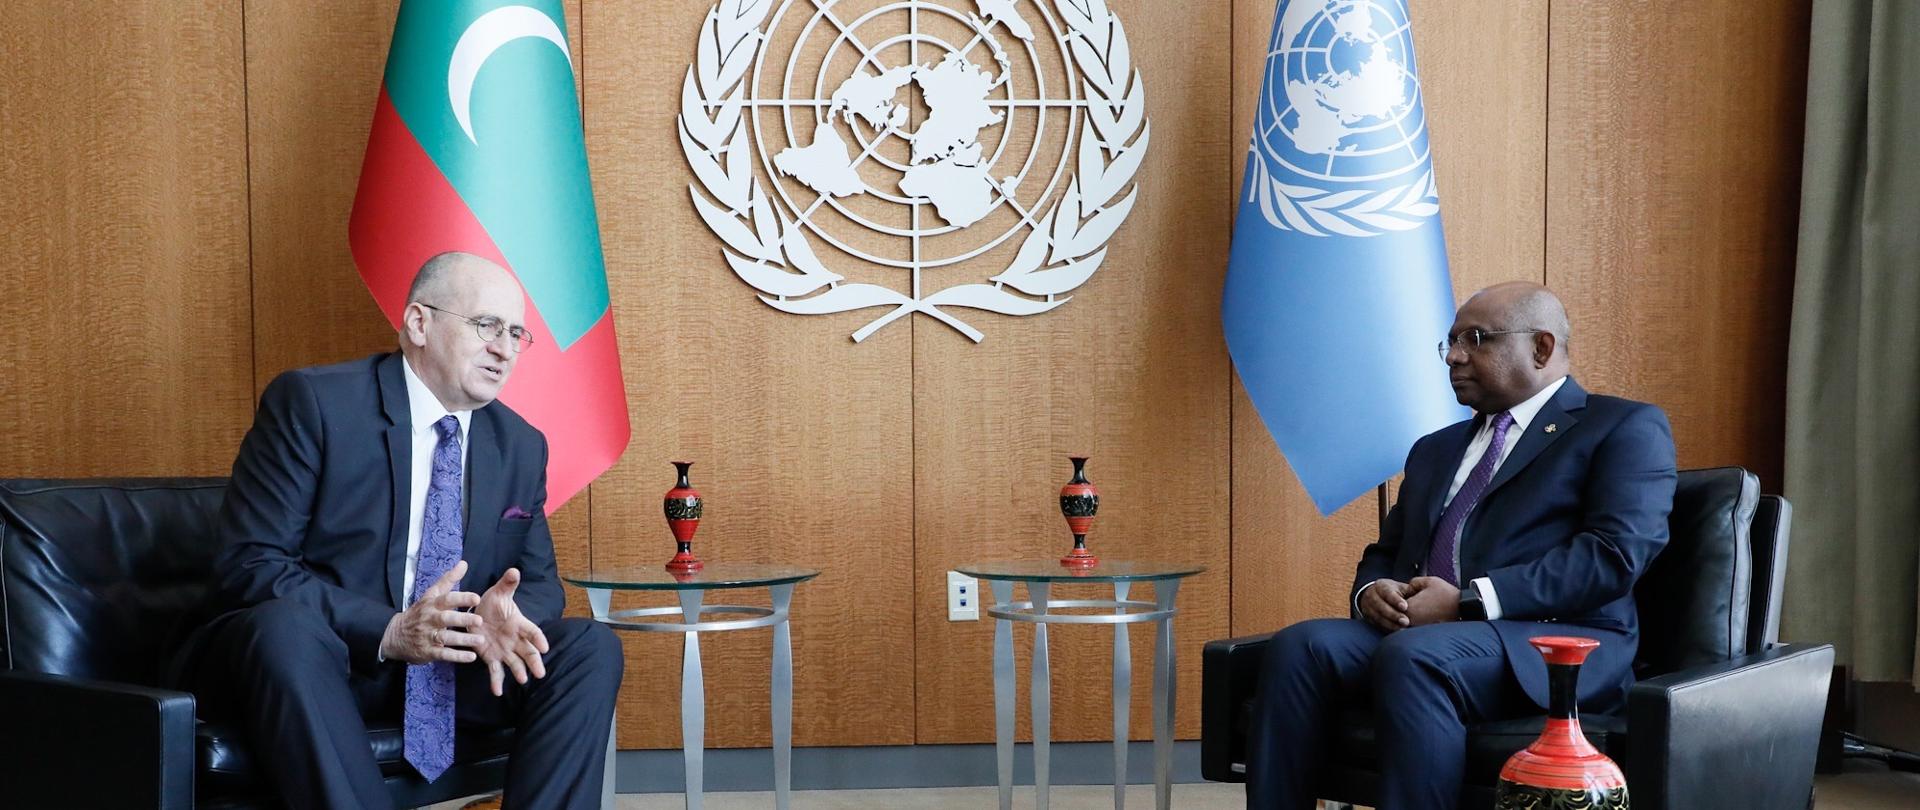 Minister Rau with the Chairman of the UN General Assembly Abdulla Shahid